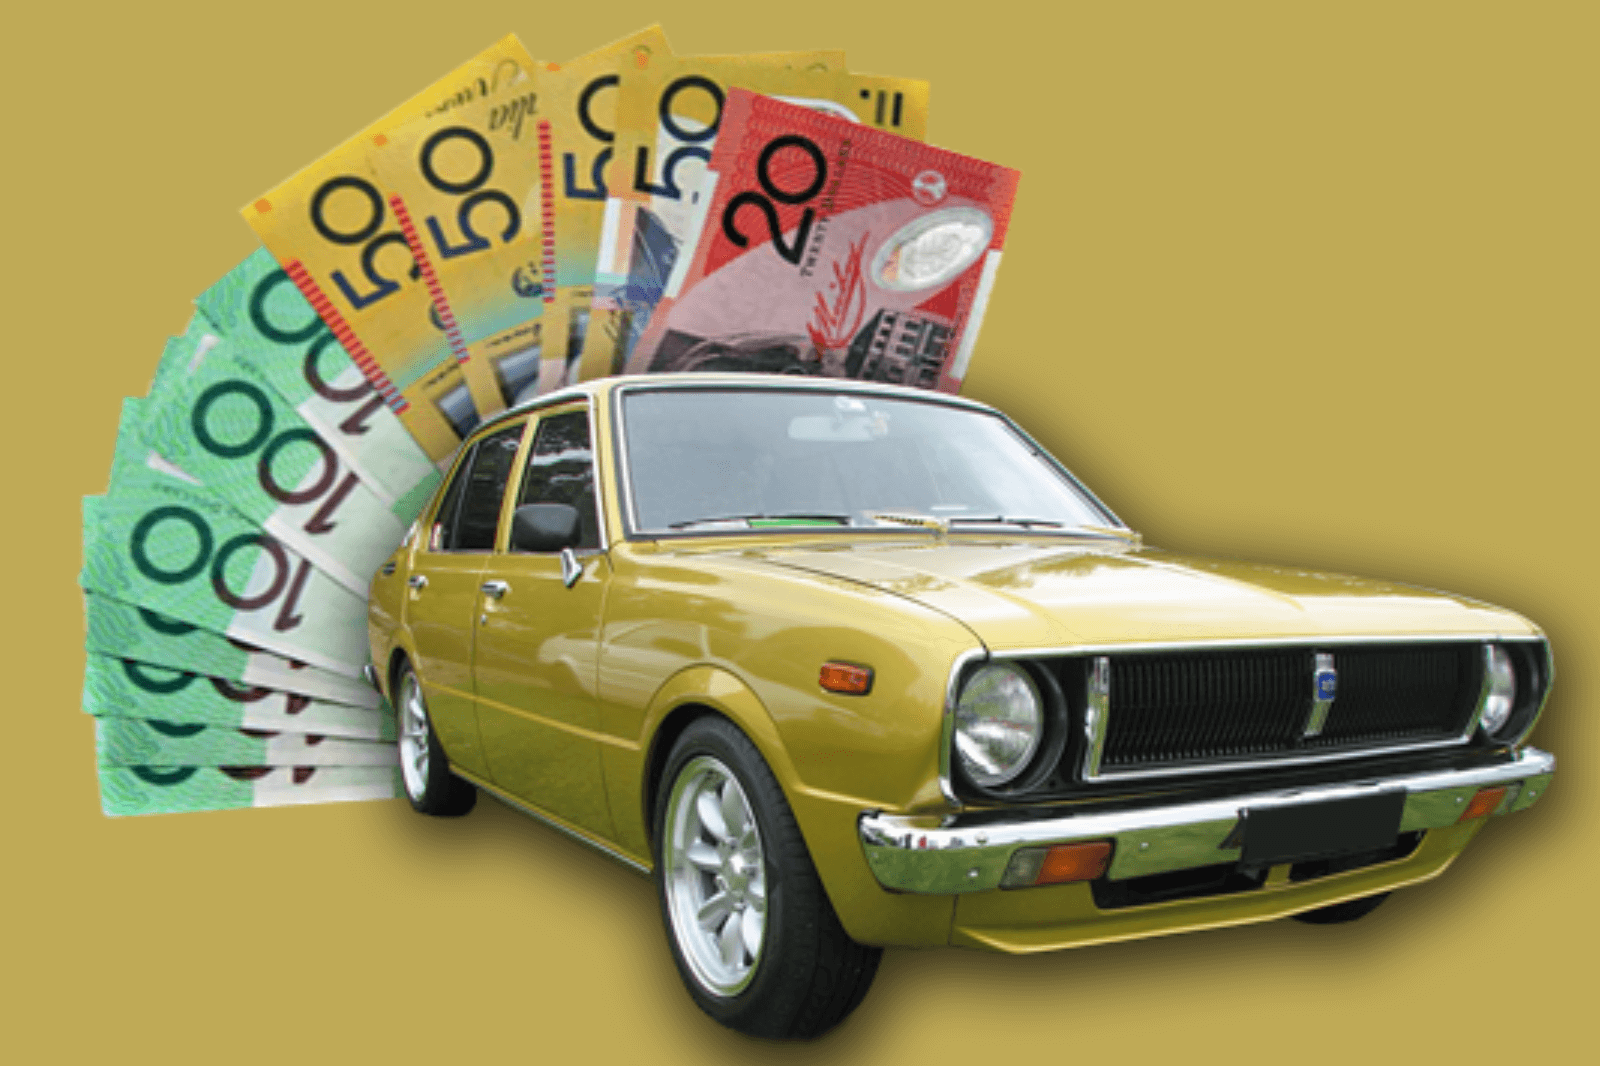 Selling Vintage and Classic Cars in Sydney: A Collector's Guide